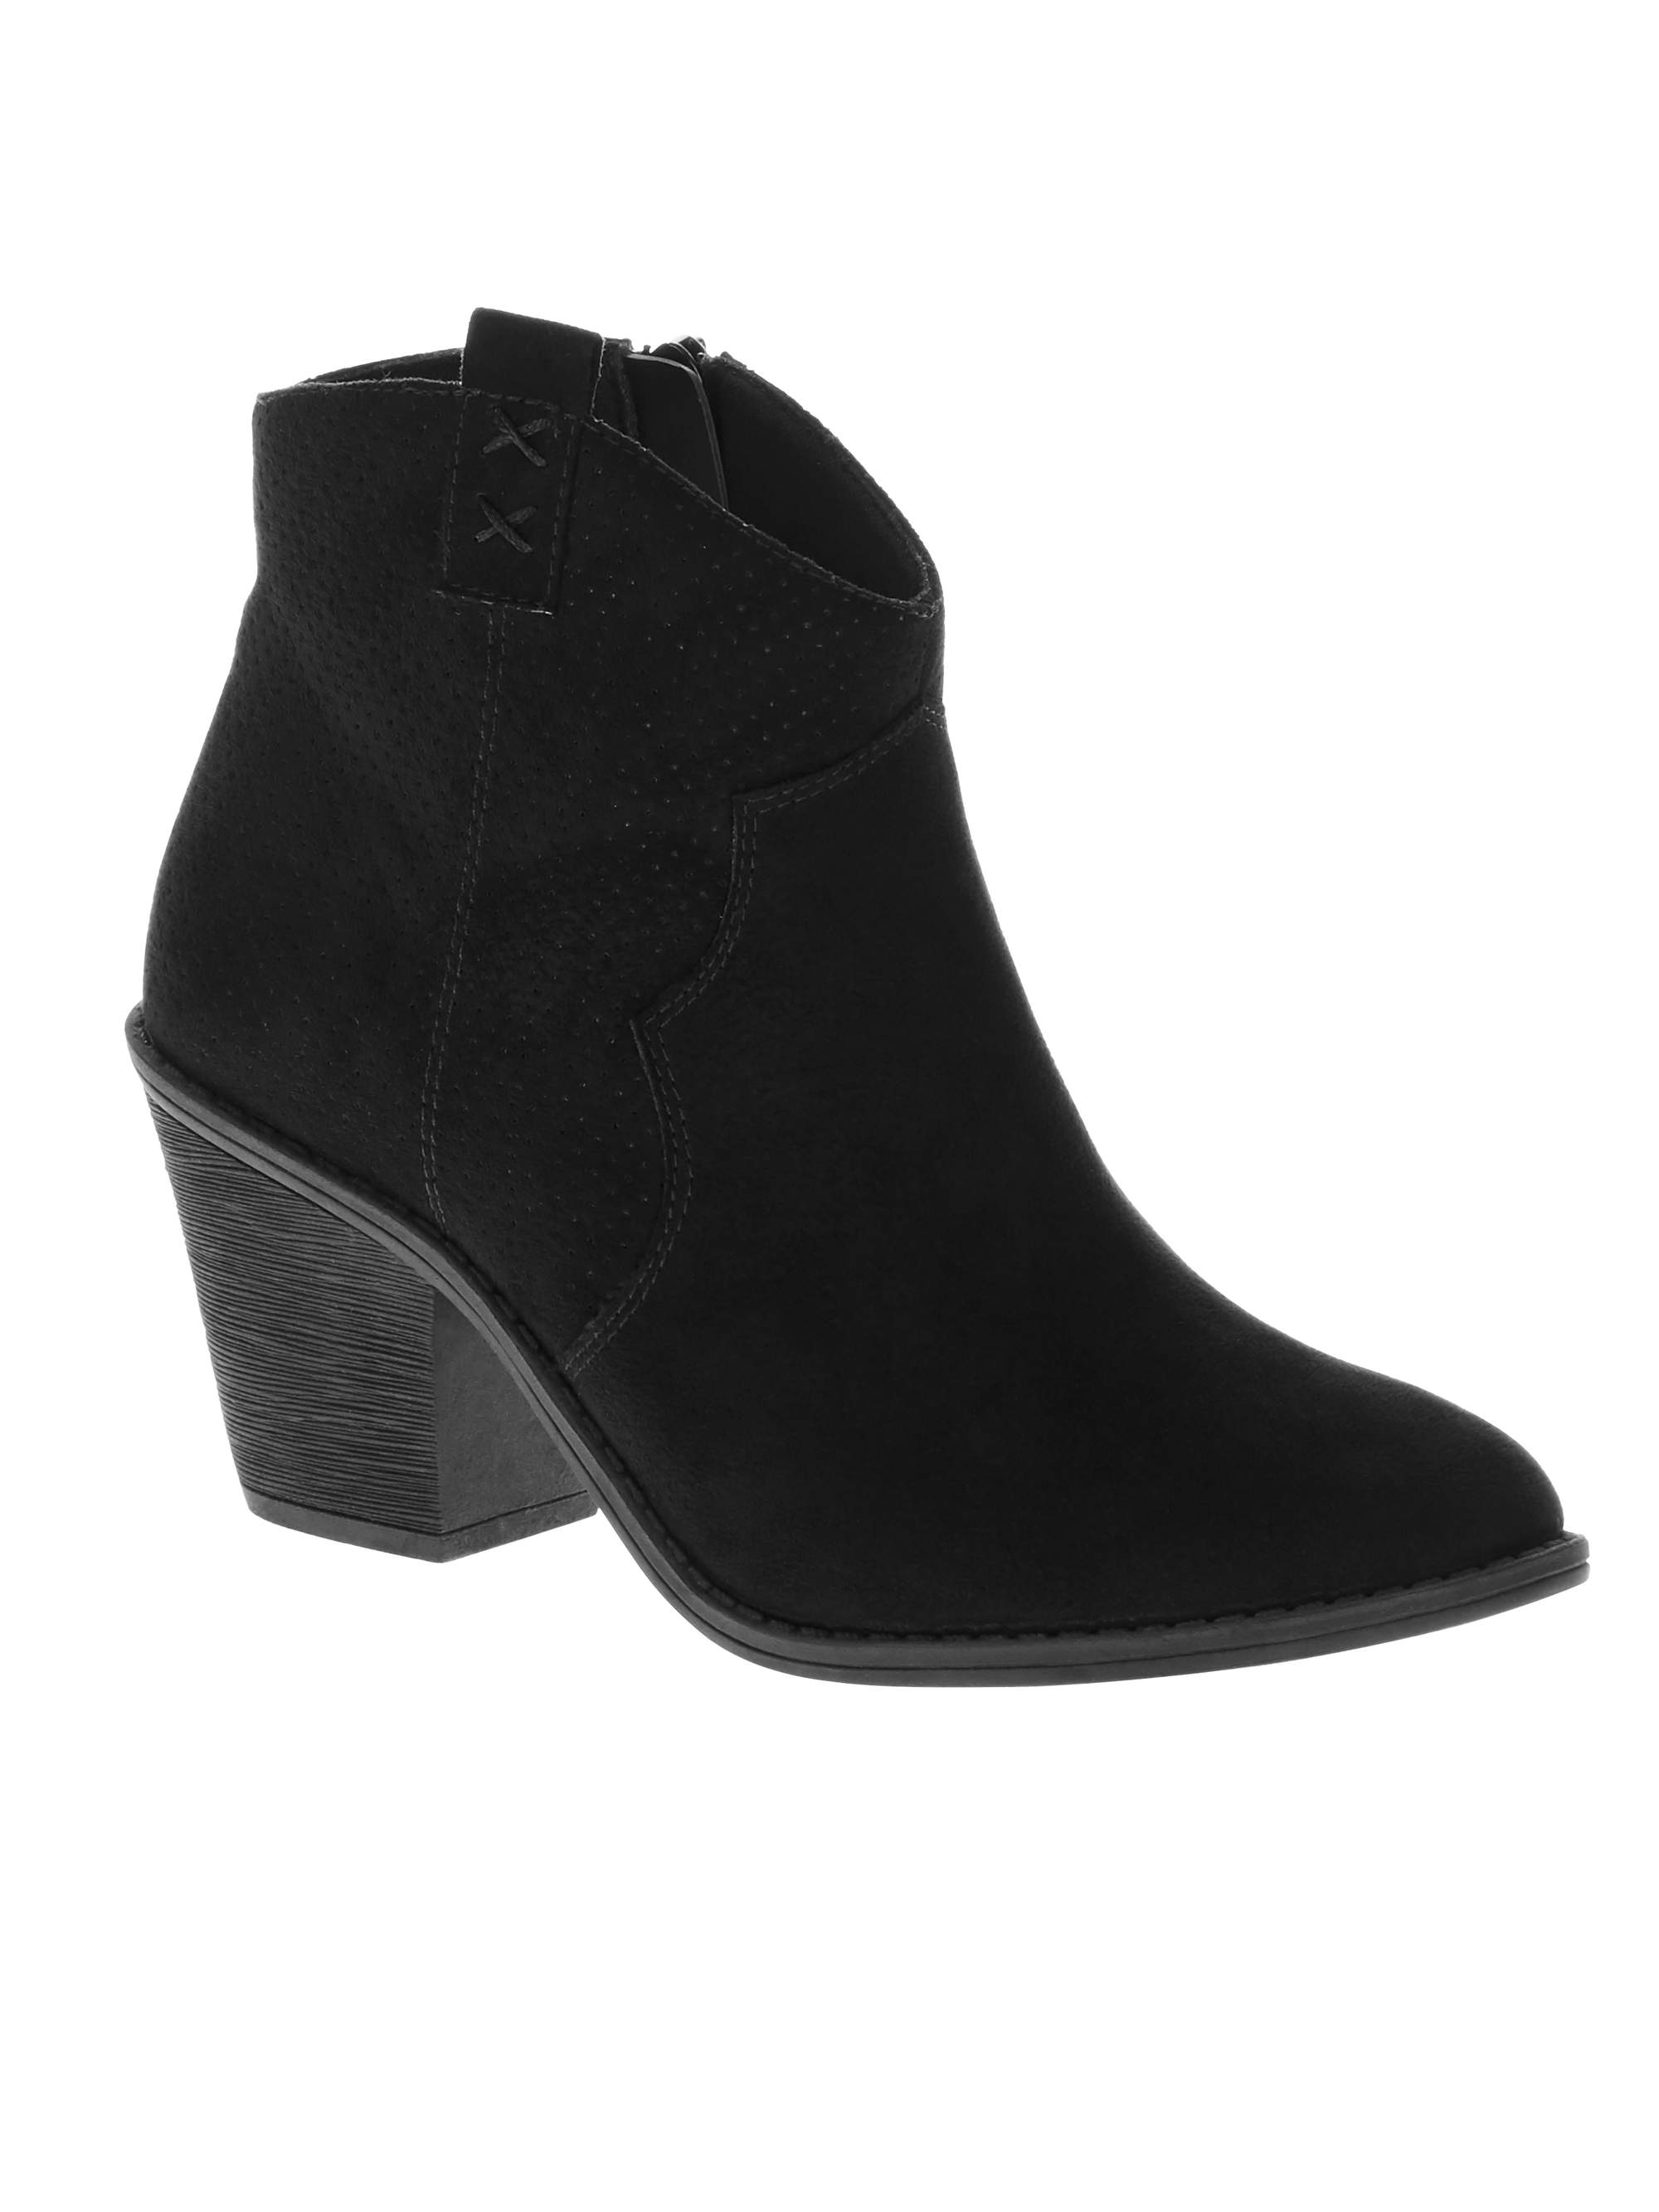 Time and Tru Women's Western Style Boot - image 1 of 6